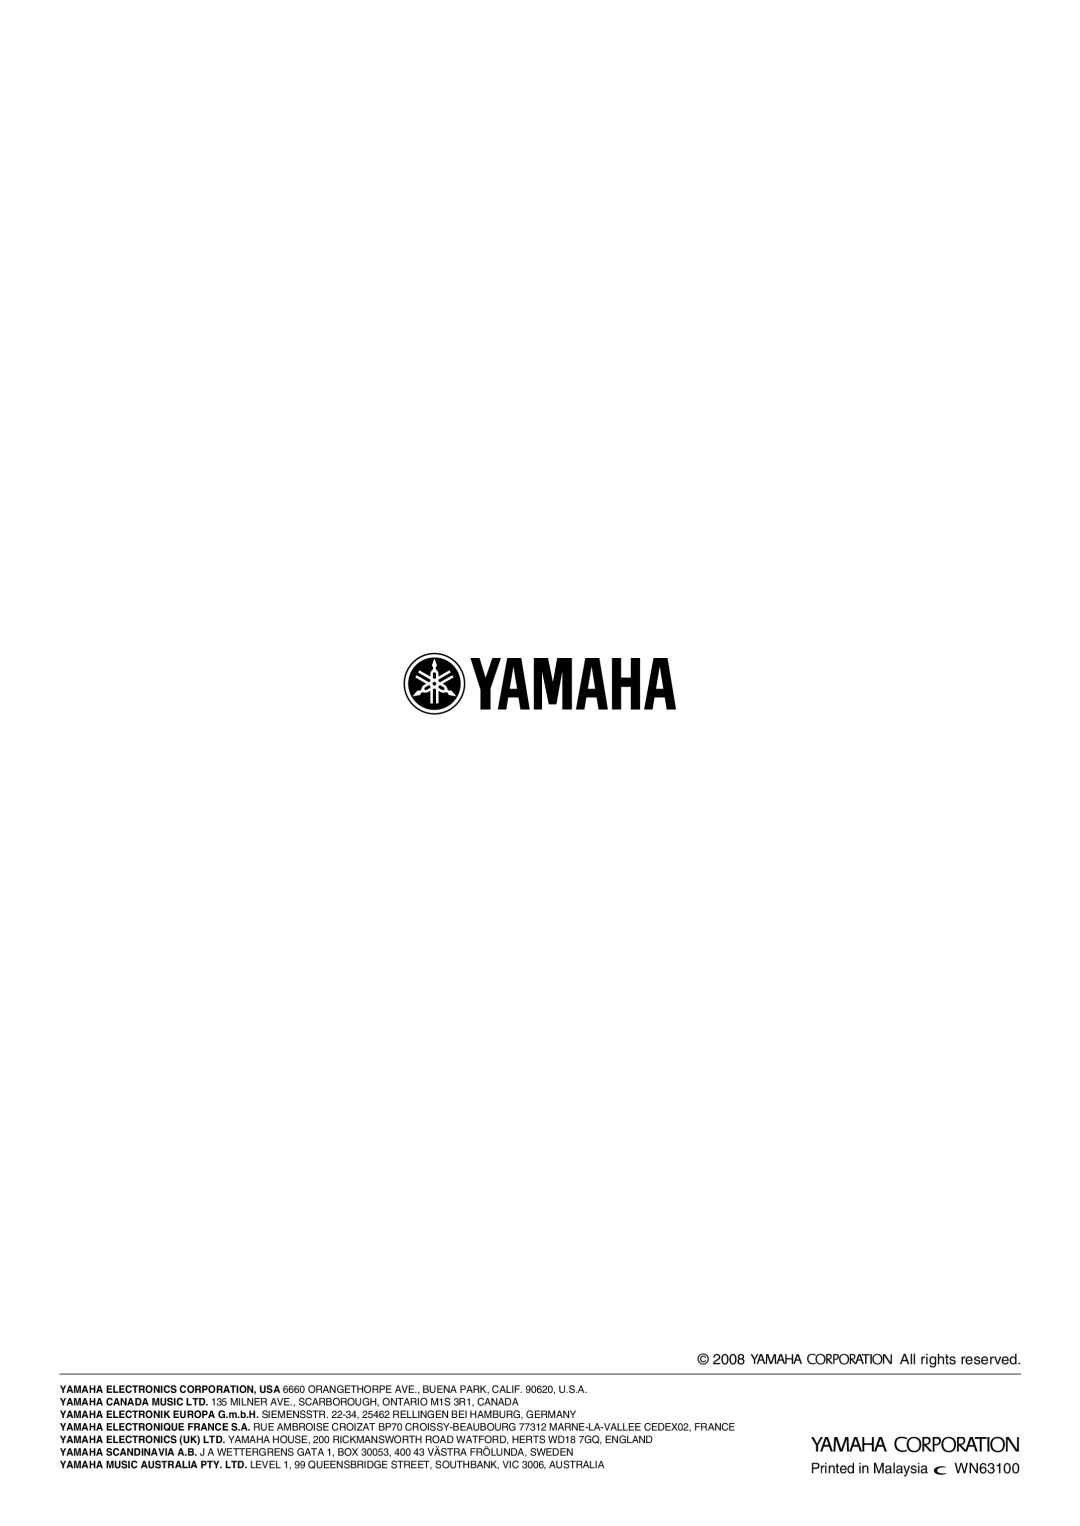 Yamaha A-S1000 owner manual 2008, WN63100, All rights reserved 